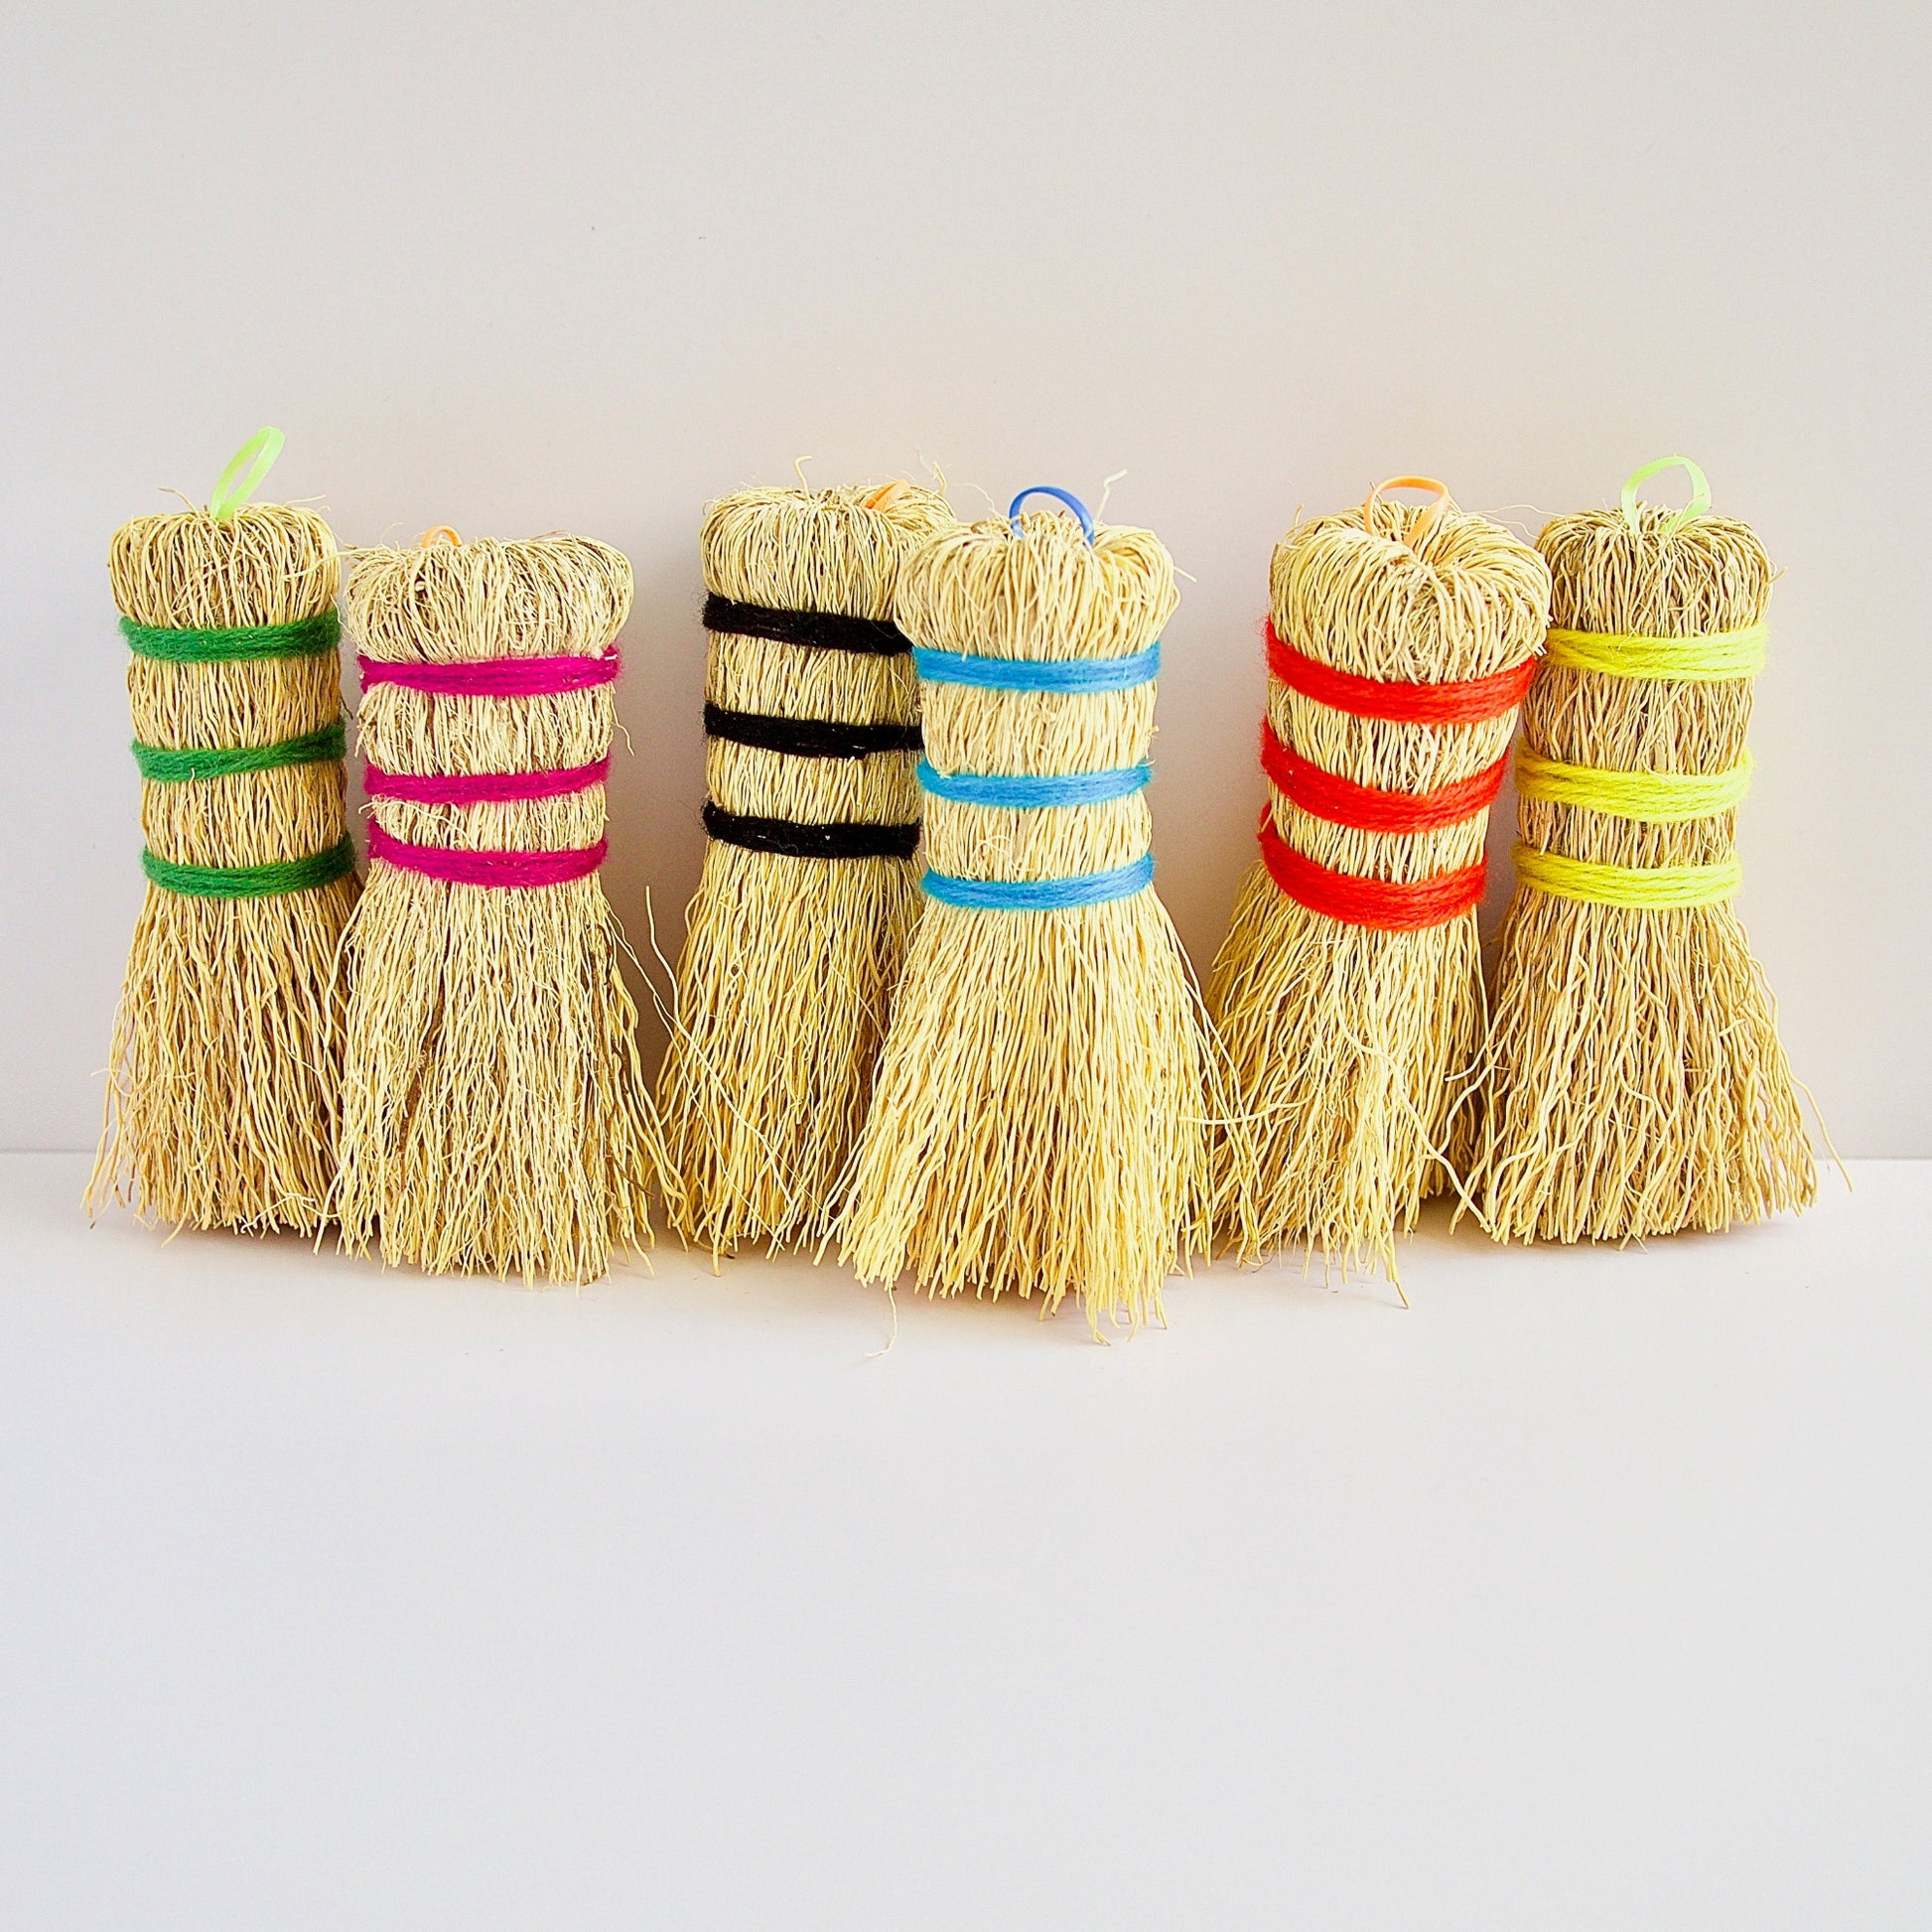 Pot Scrubbers  Handmade Colorful Brooms